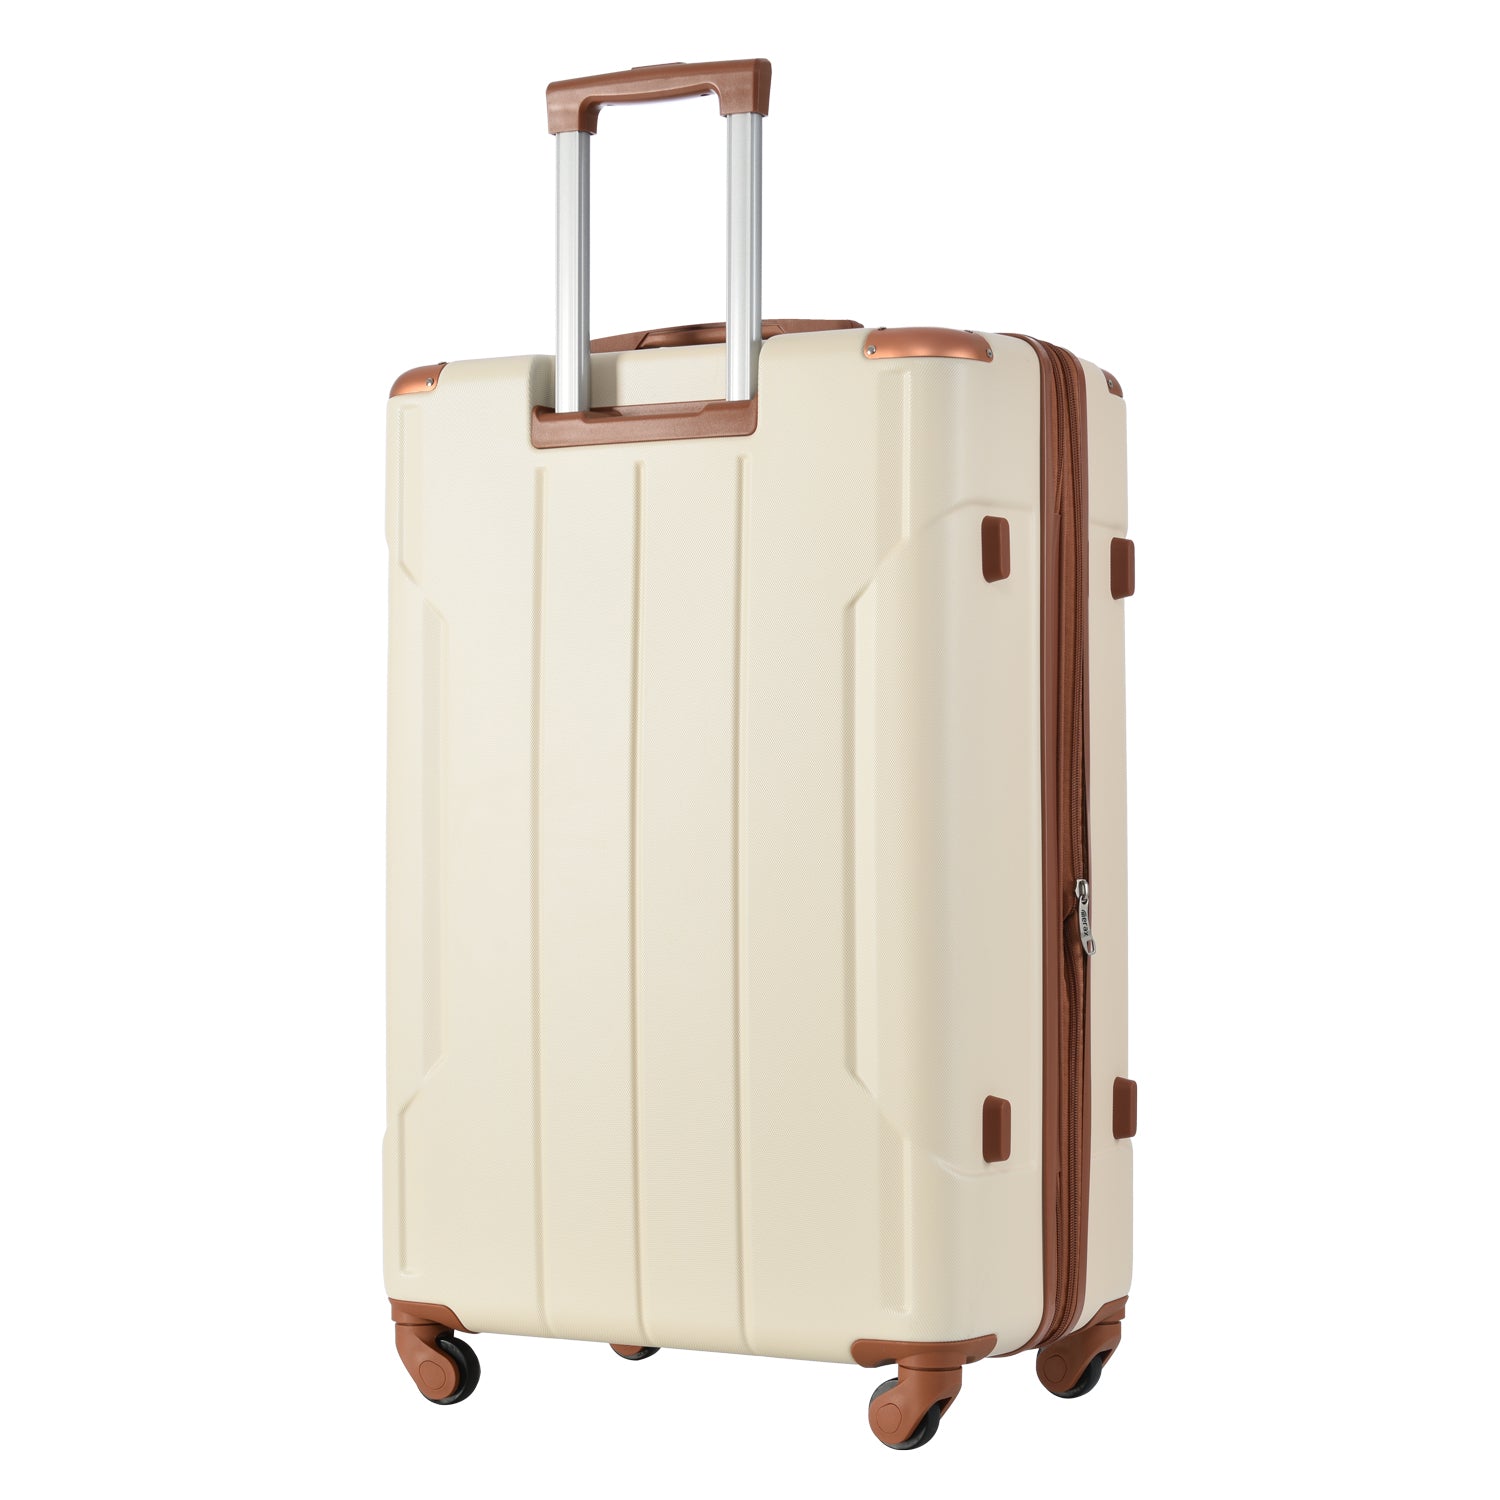 Hardside Luggage Sets 2 Piece Suitcase Set Expandable brown white-abs